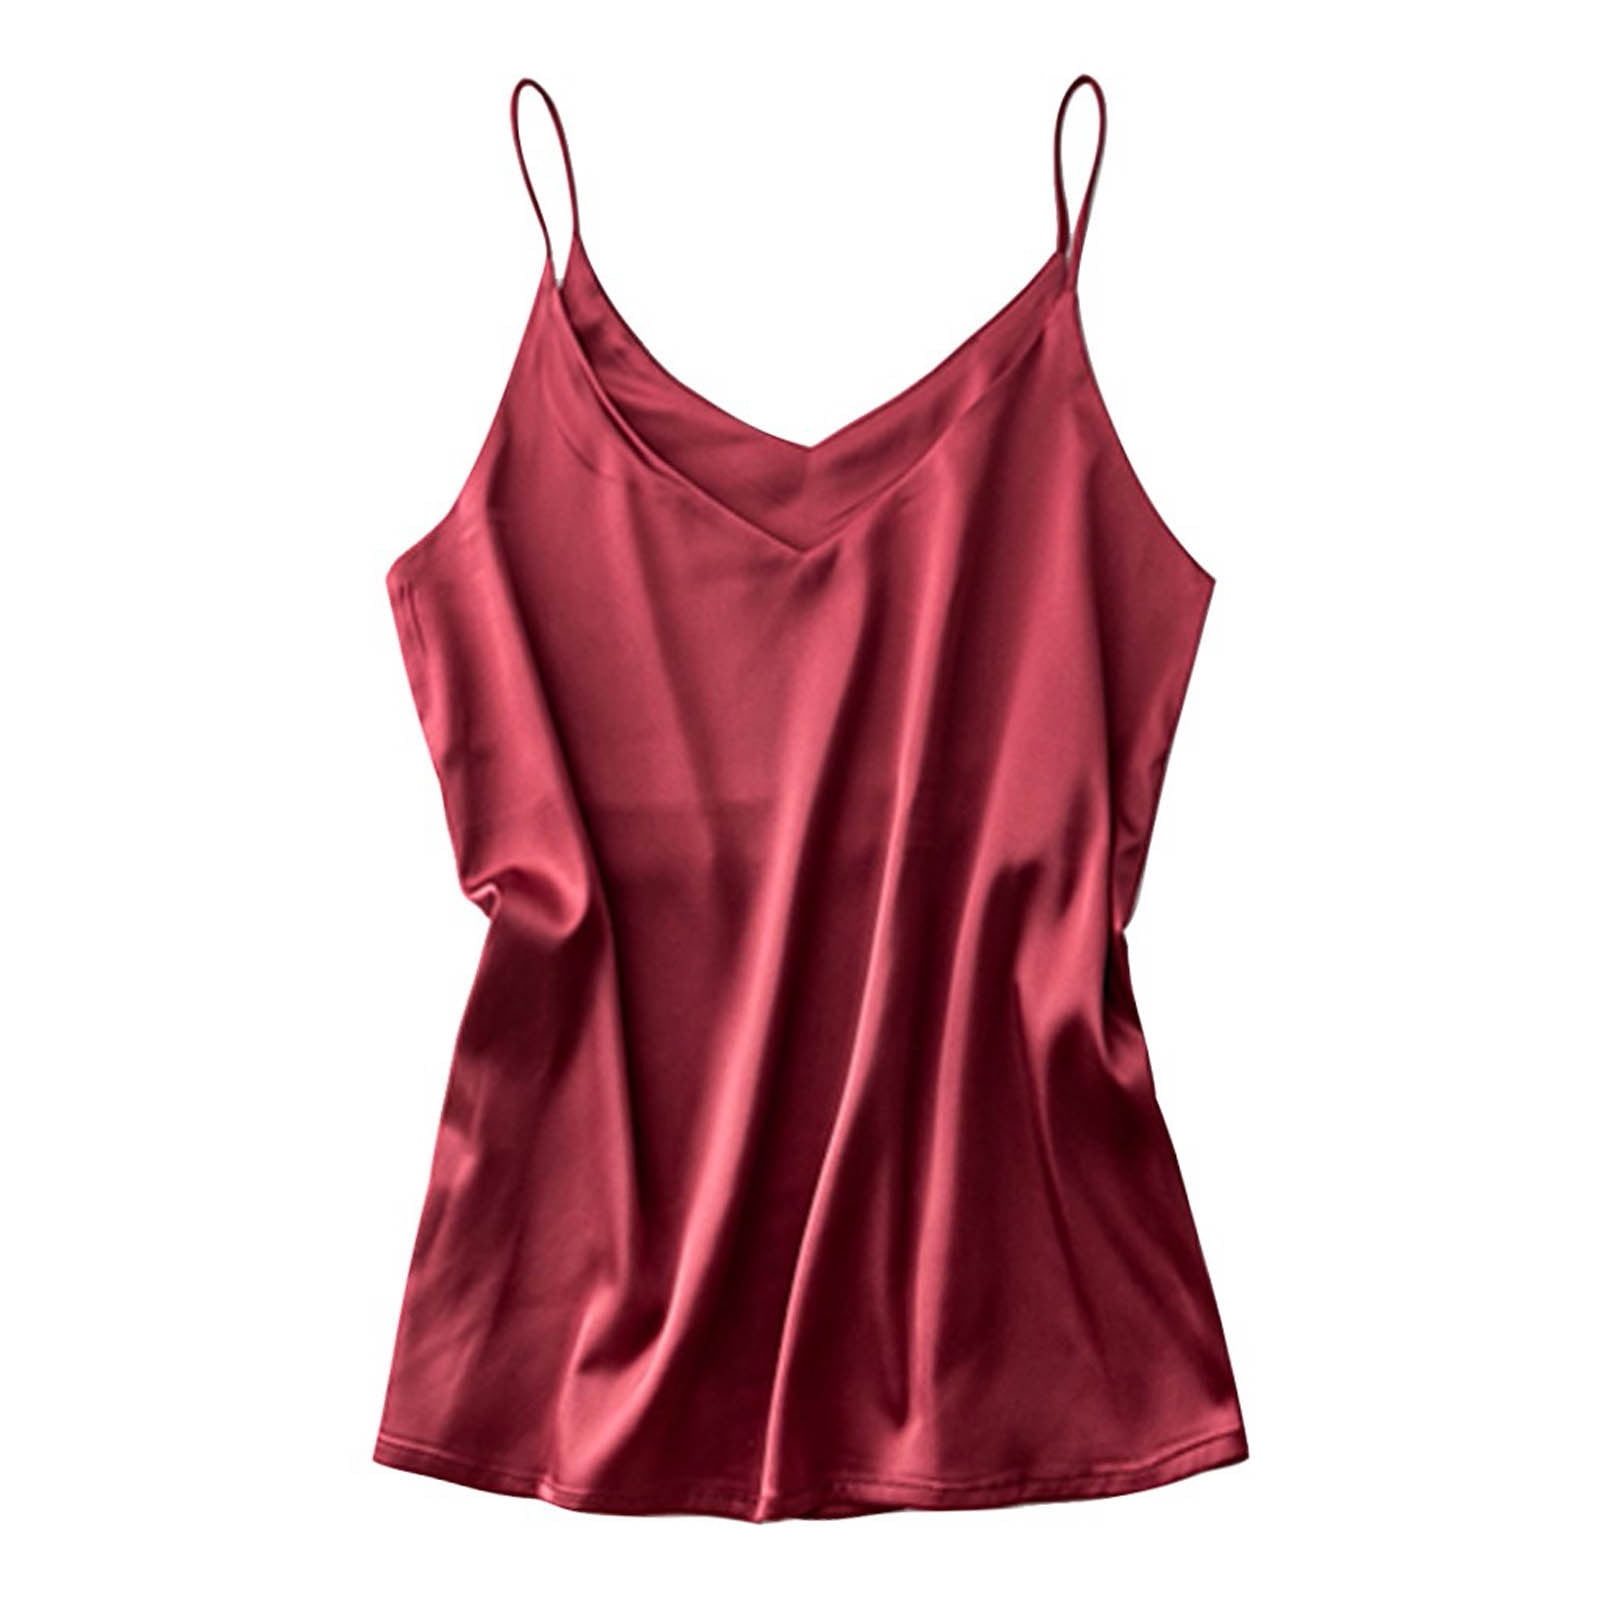 FAVIPT Satin Camisole Tops For Women Solid Color V Neck Silk Sleeveless ...